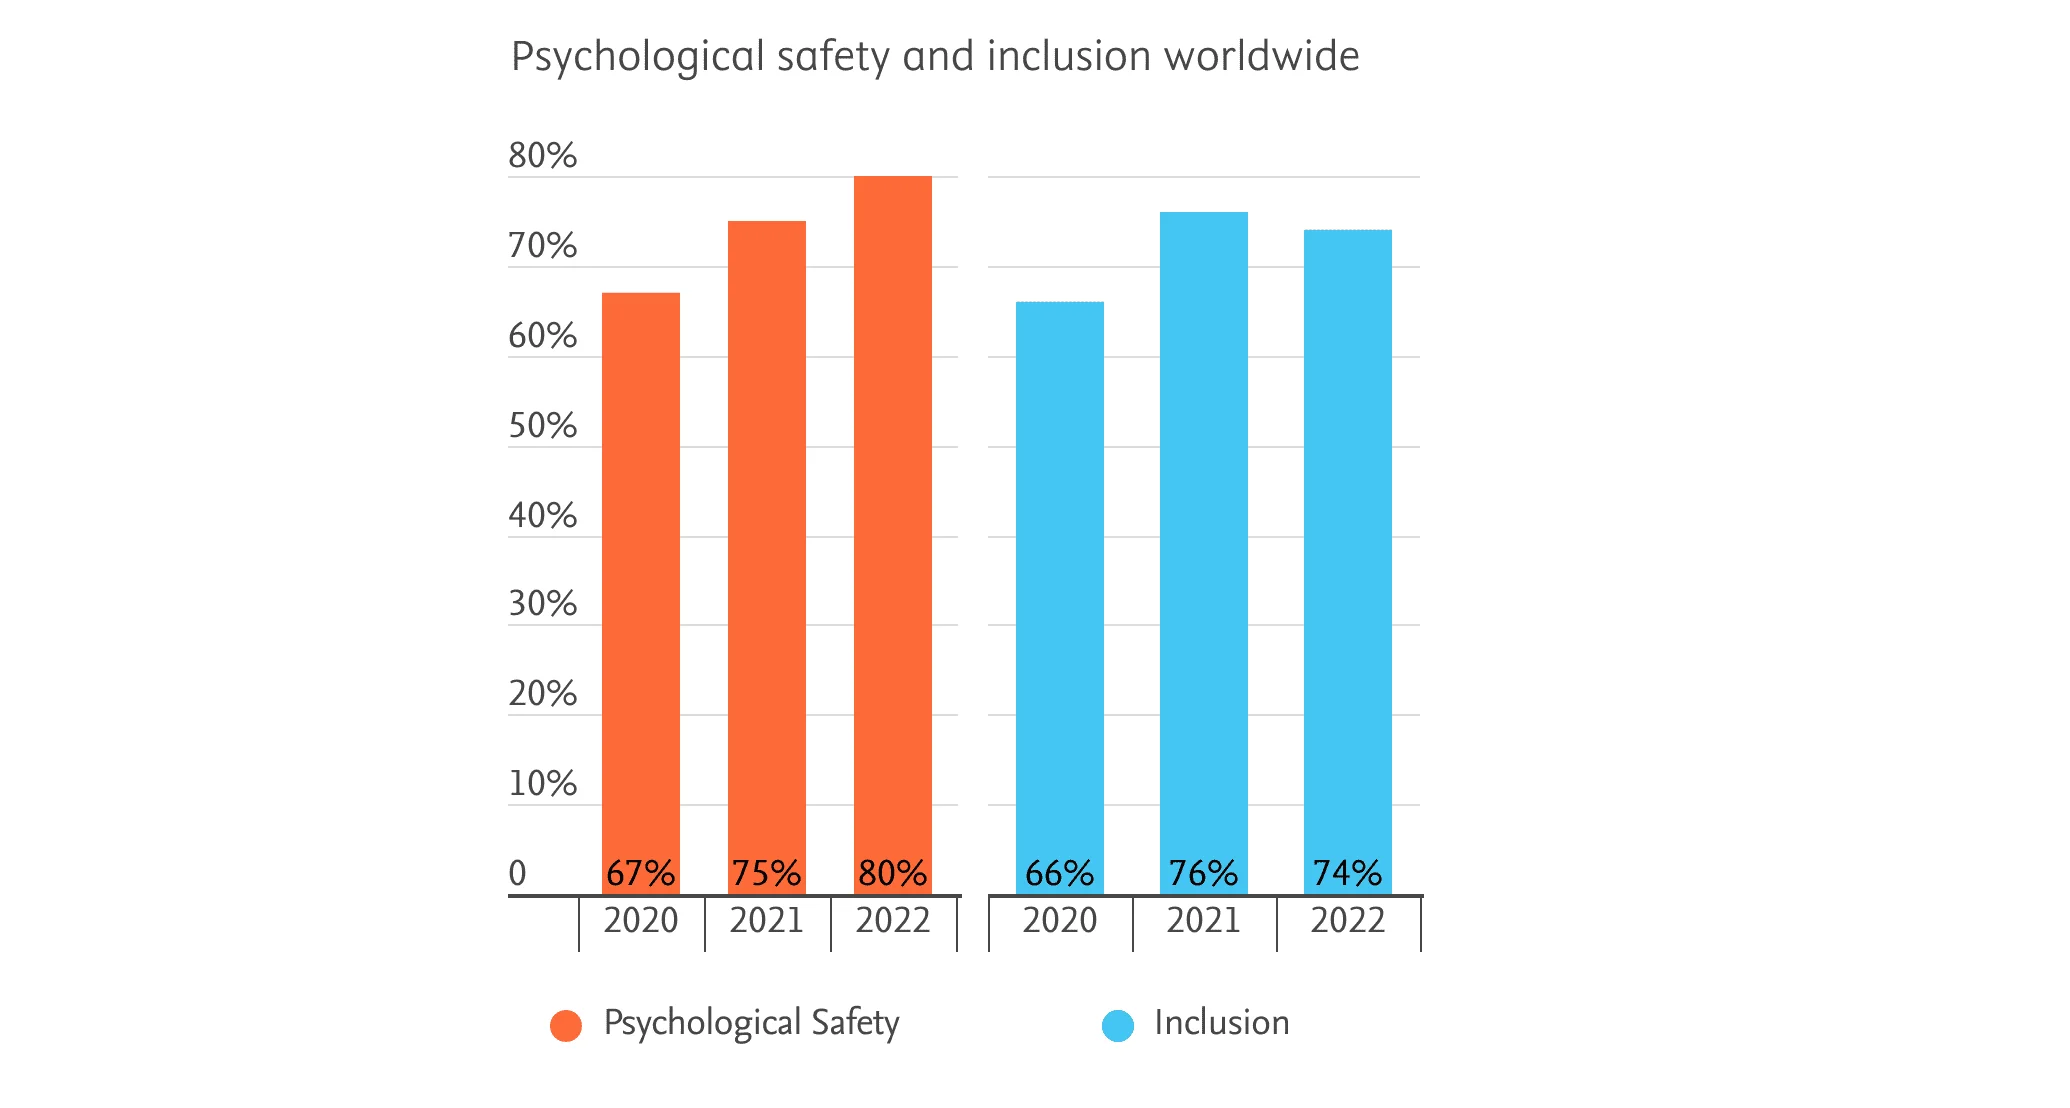 Chart showing psychological safety and inclusion data for 2020, 2021 & 2022